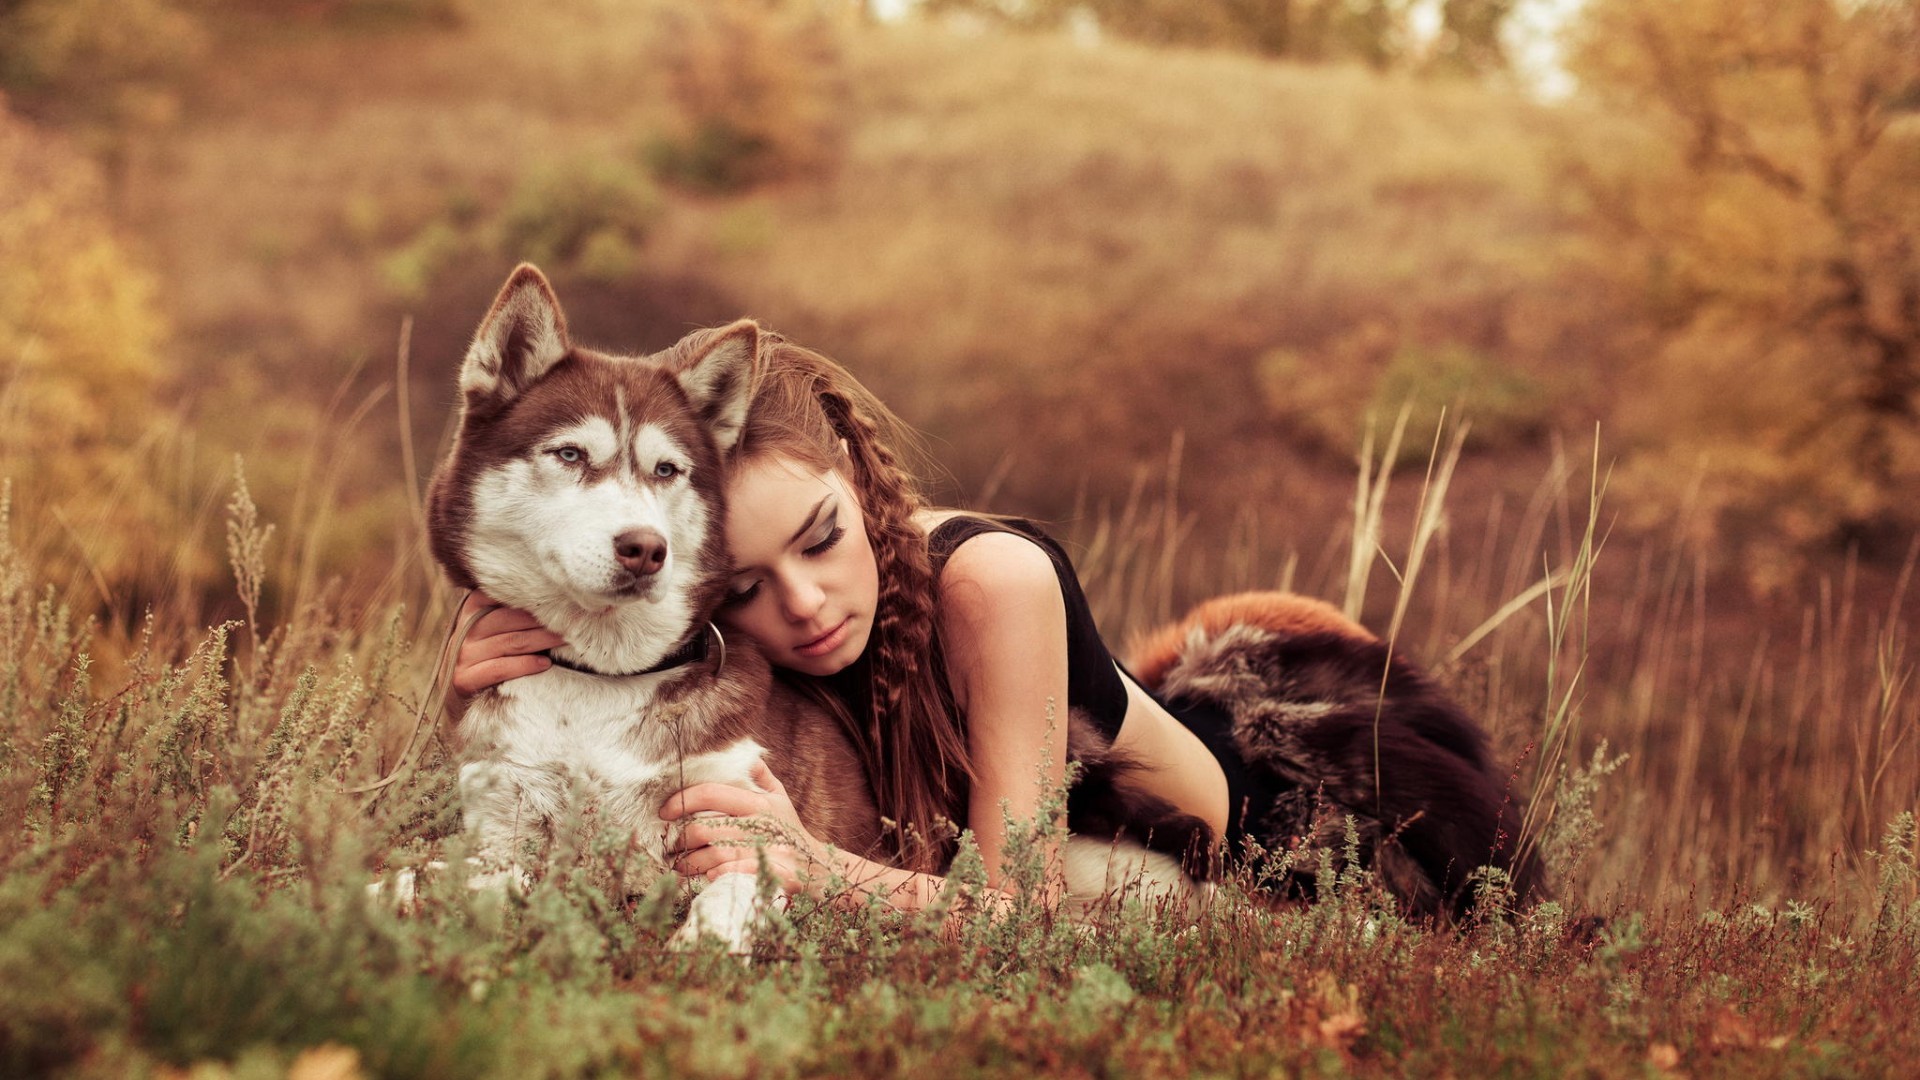 dog hugging women outdoors animals closed eyes Wallpaper HD / Desktop and Mobile Background